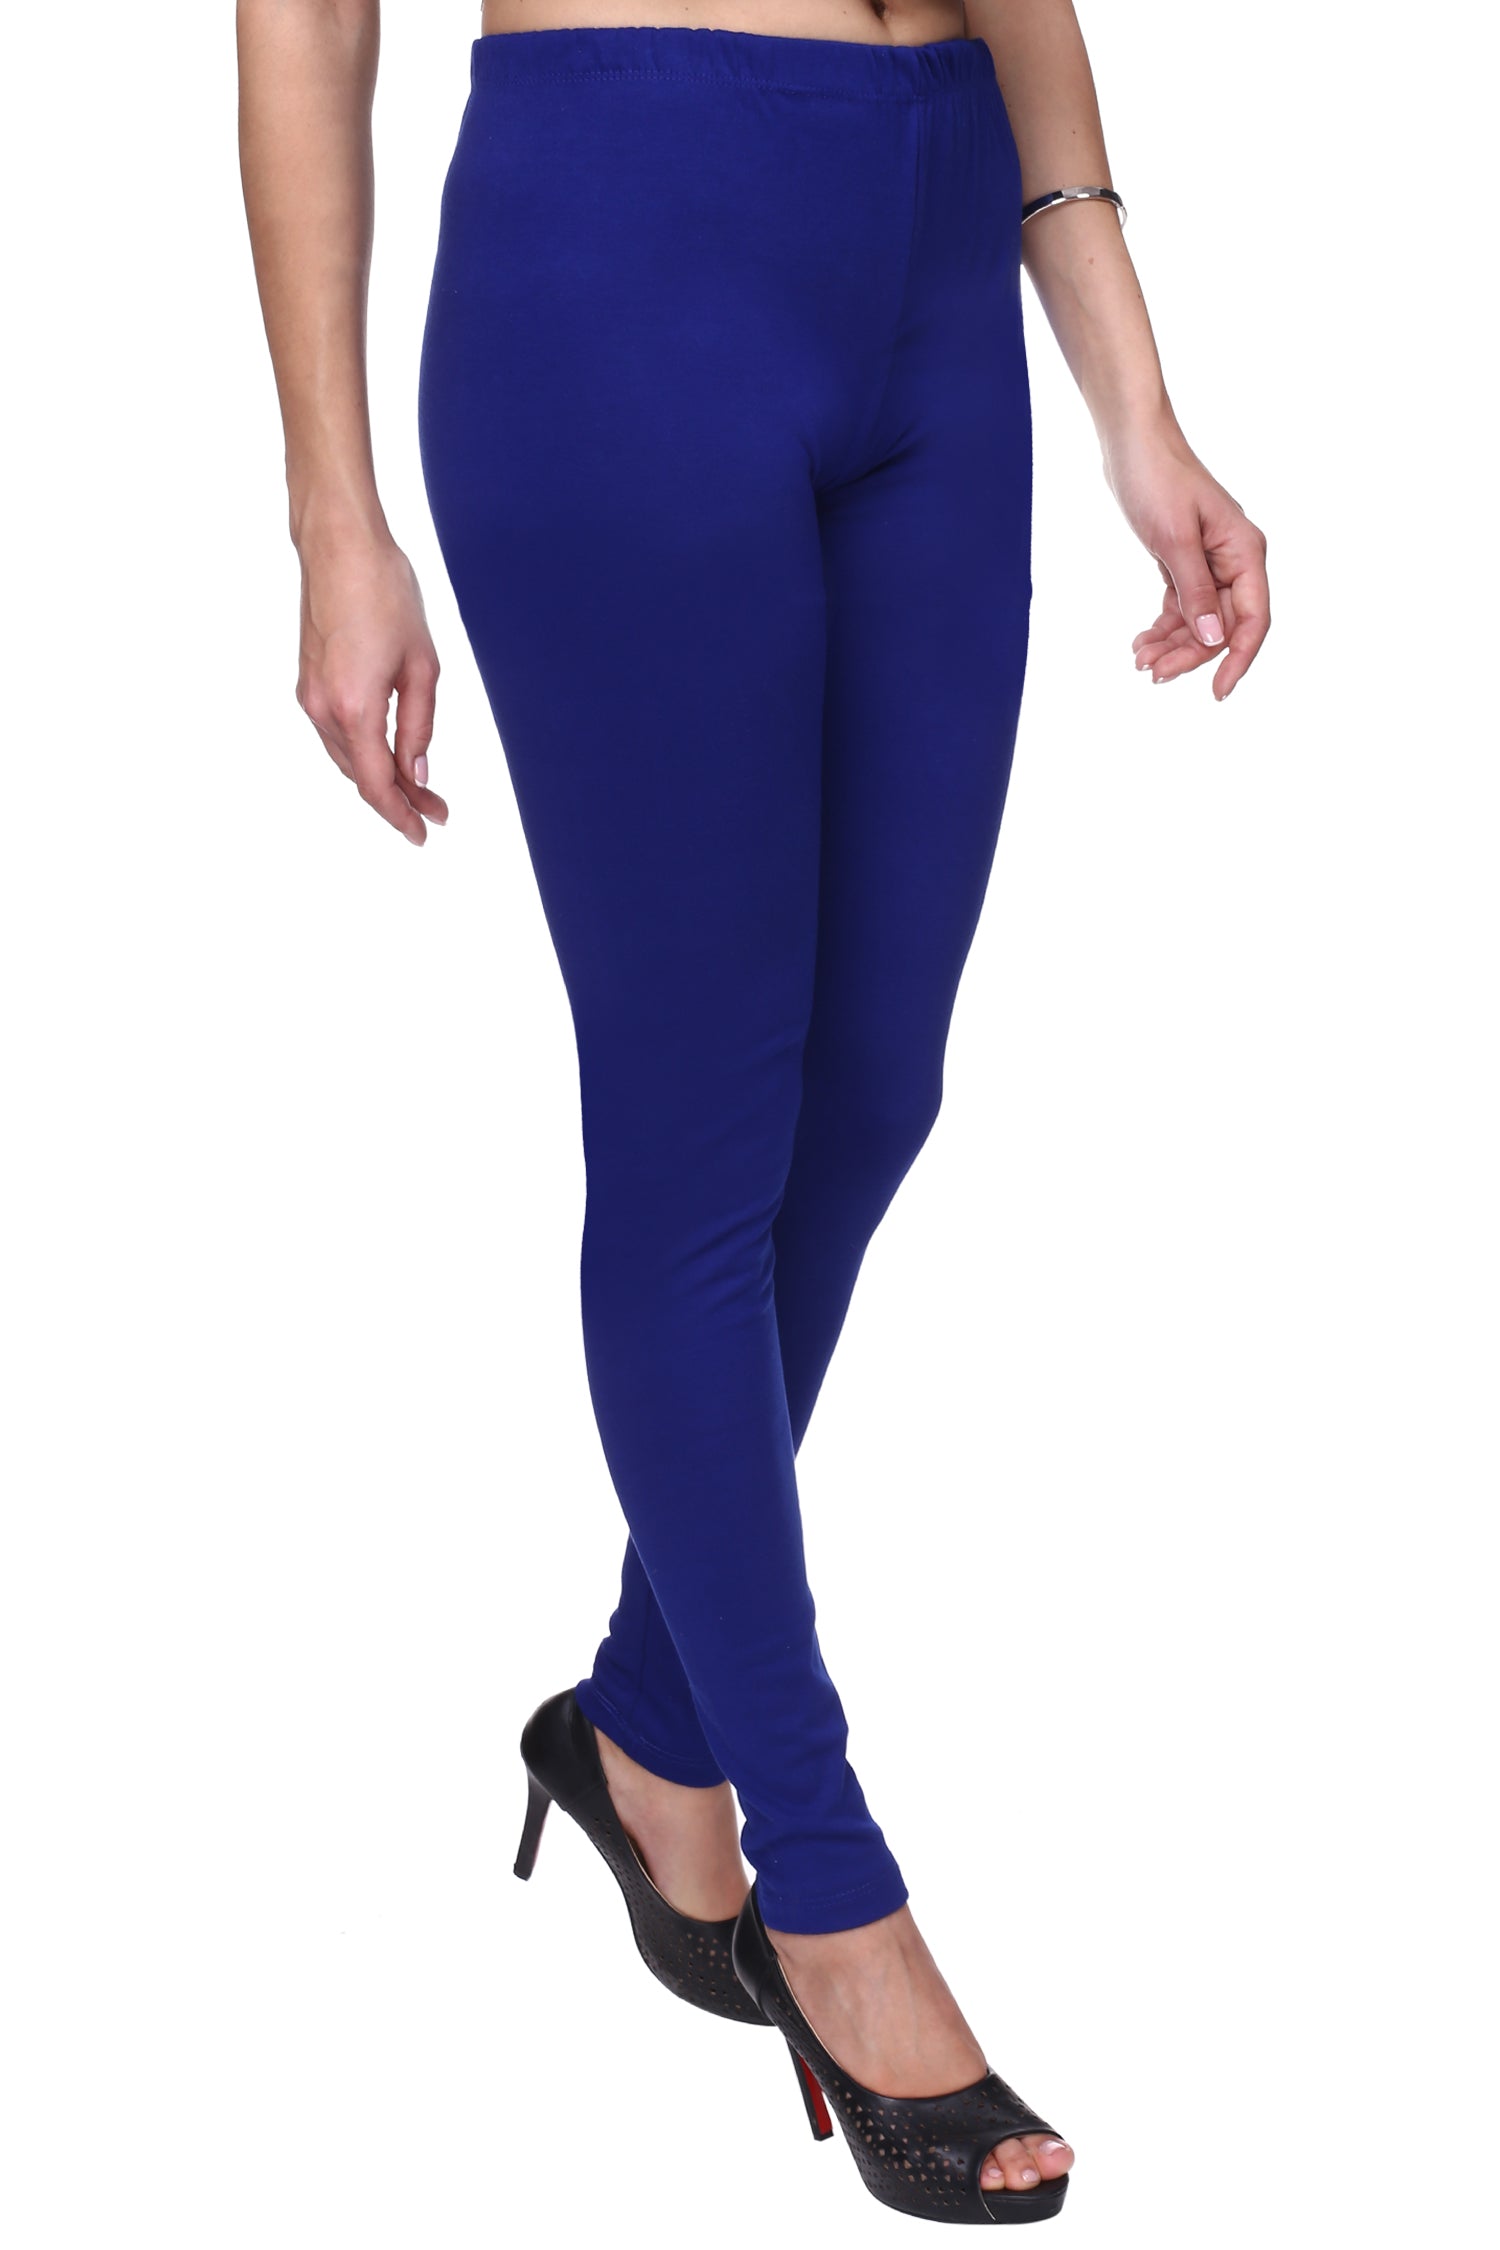 Mid Waist Royal Blue Girls Leggings, Casual Wear, Skin Fit at Rs 100 in  Tiruppur